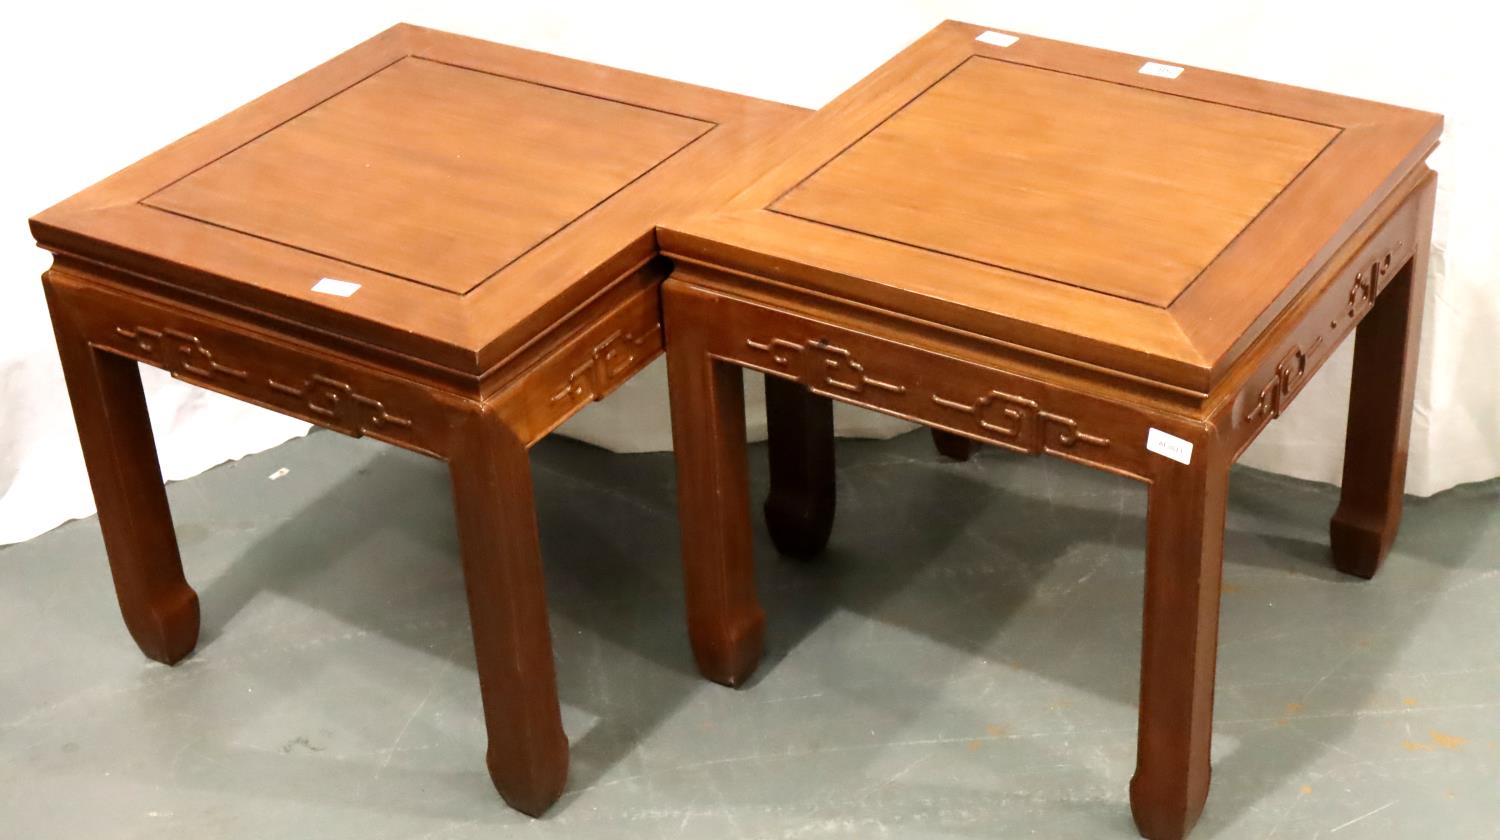 A pair of Oriental hardwood square lamp tables, each 54 x 54 x 51 cm H. Not available for in-house